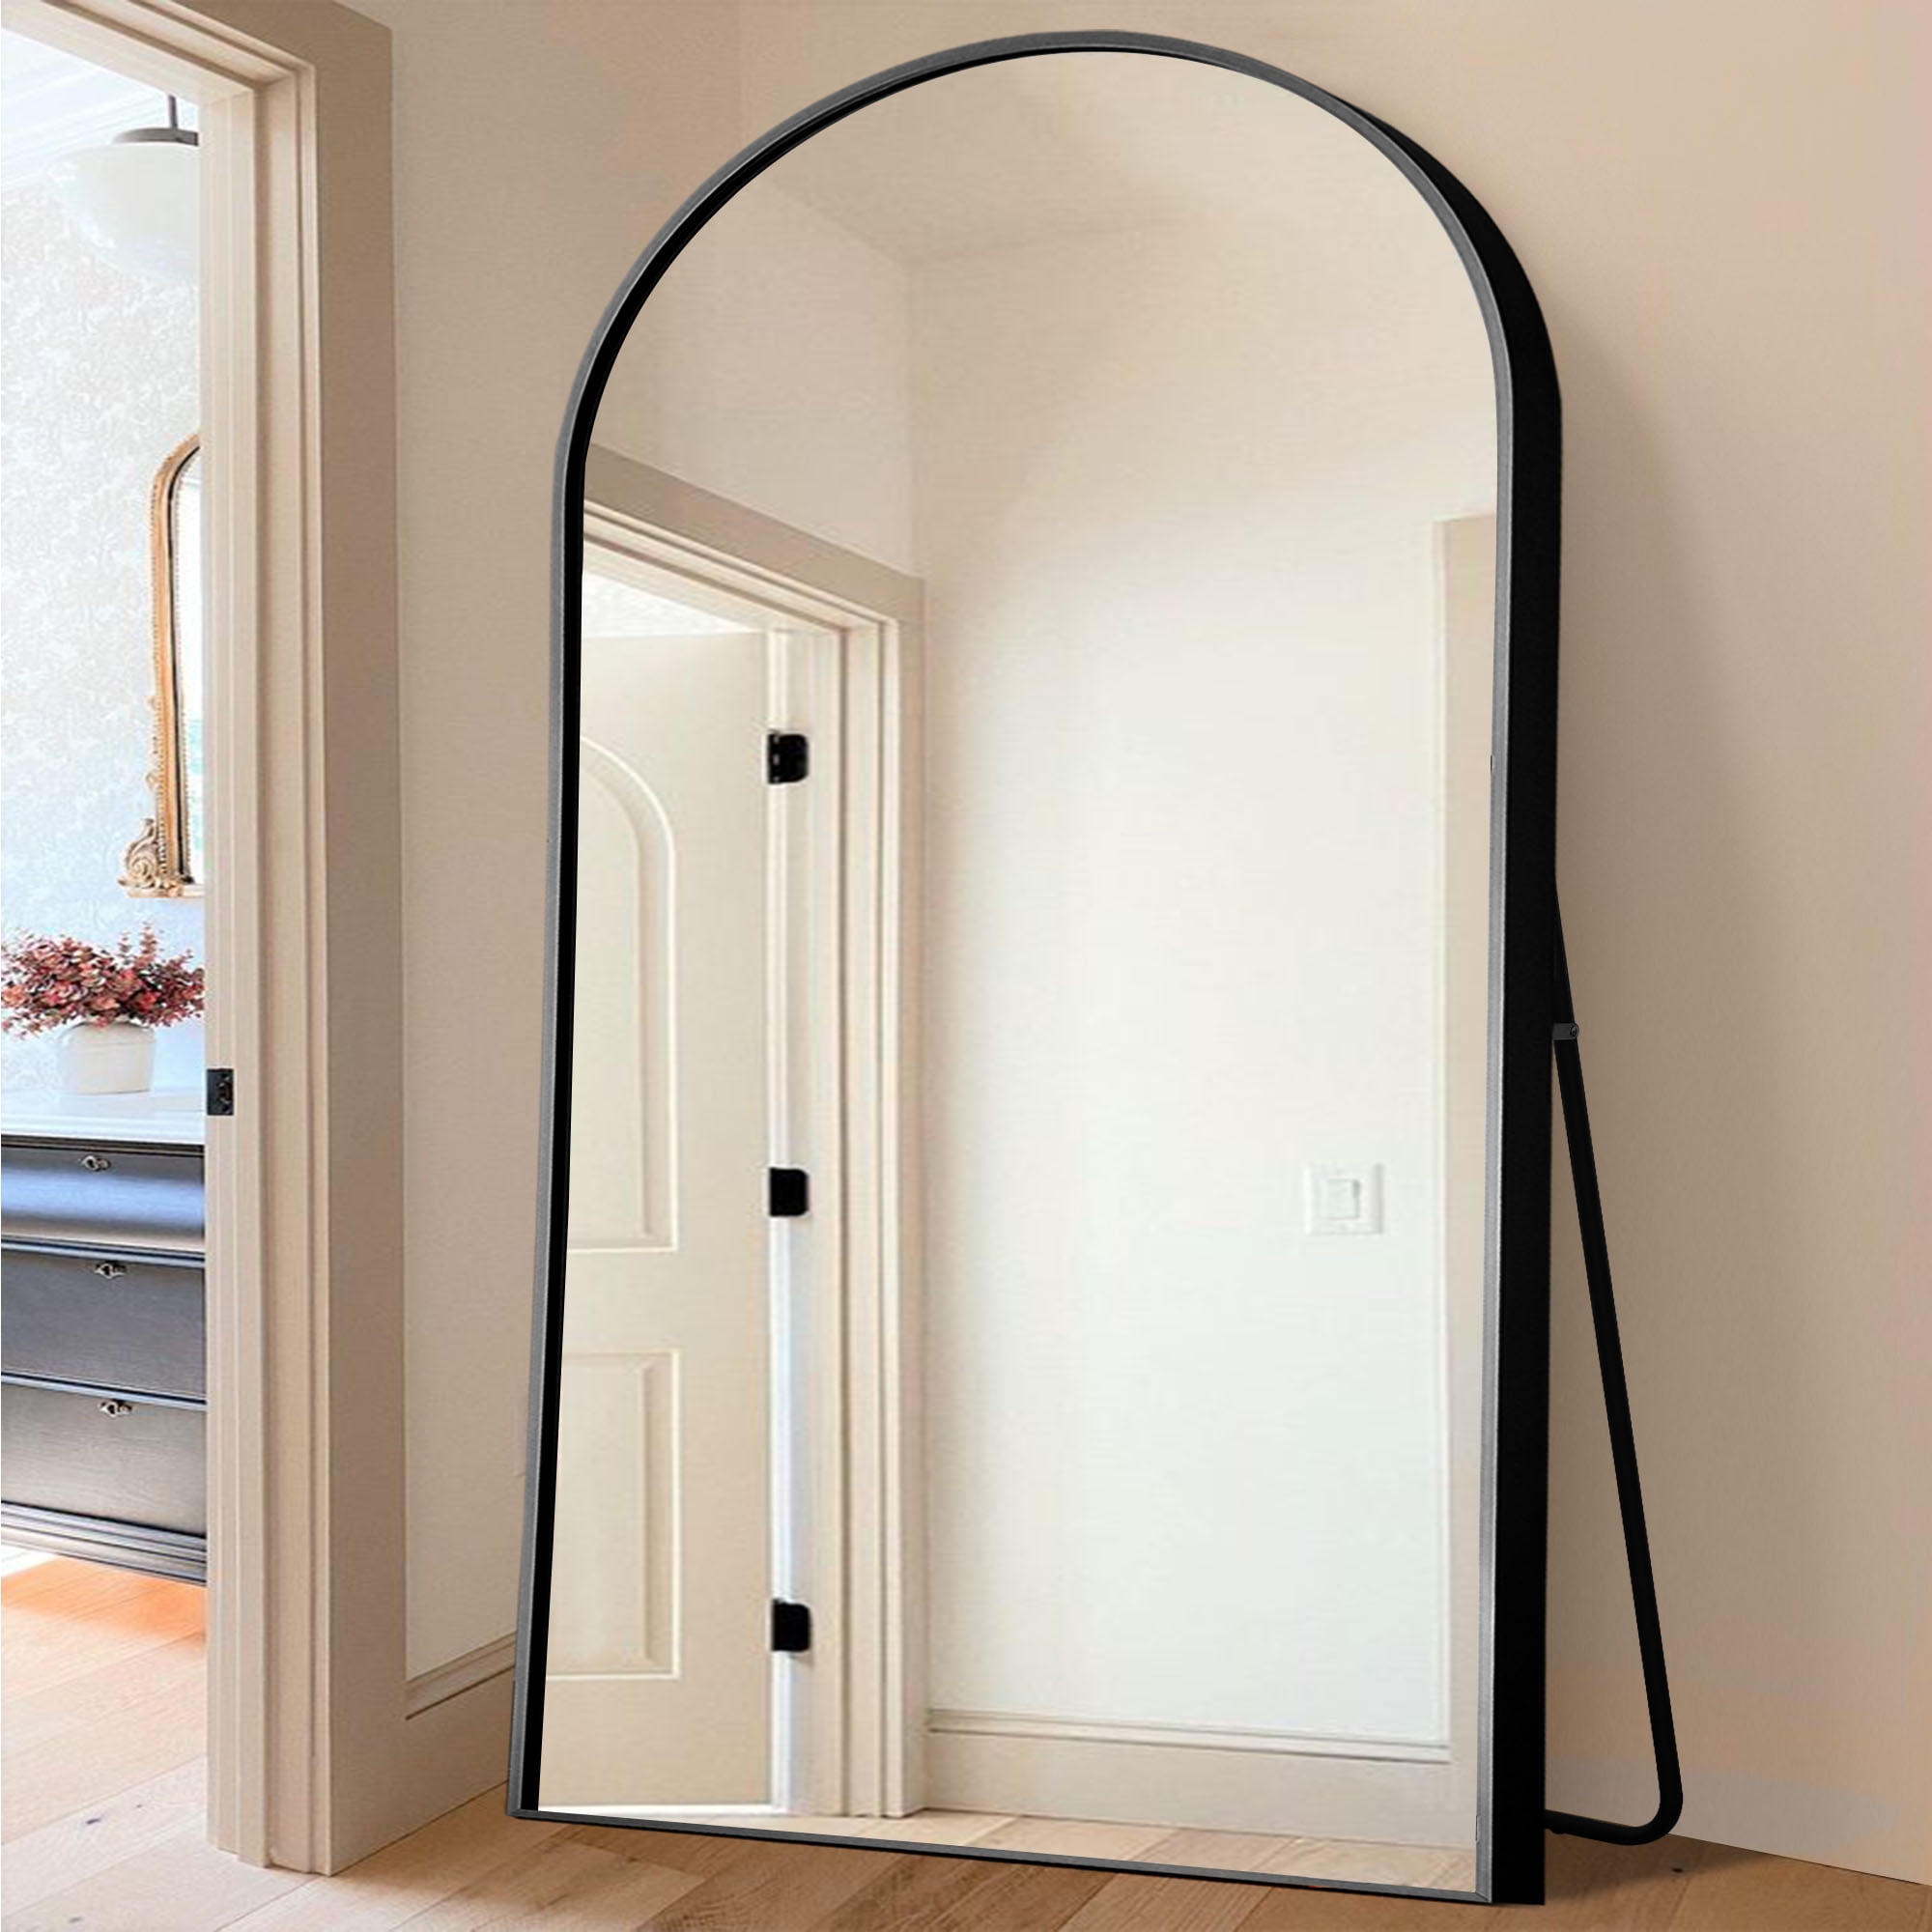 TinyTimes 64''x21'' Arched Full Length Mirror Modern Floor Mirror